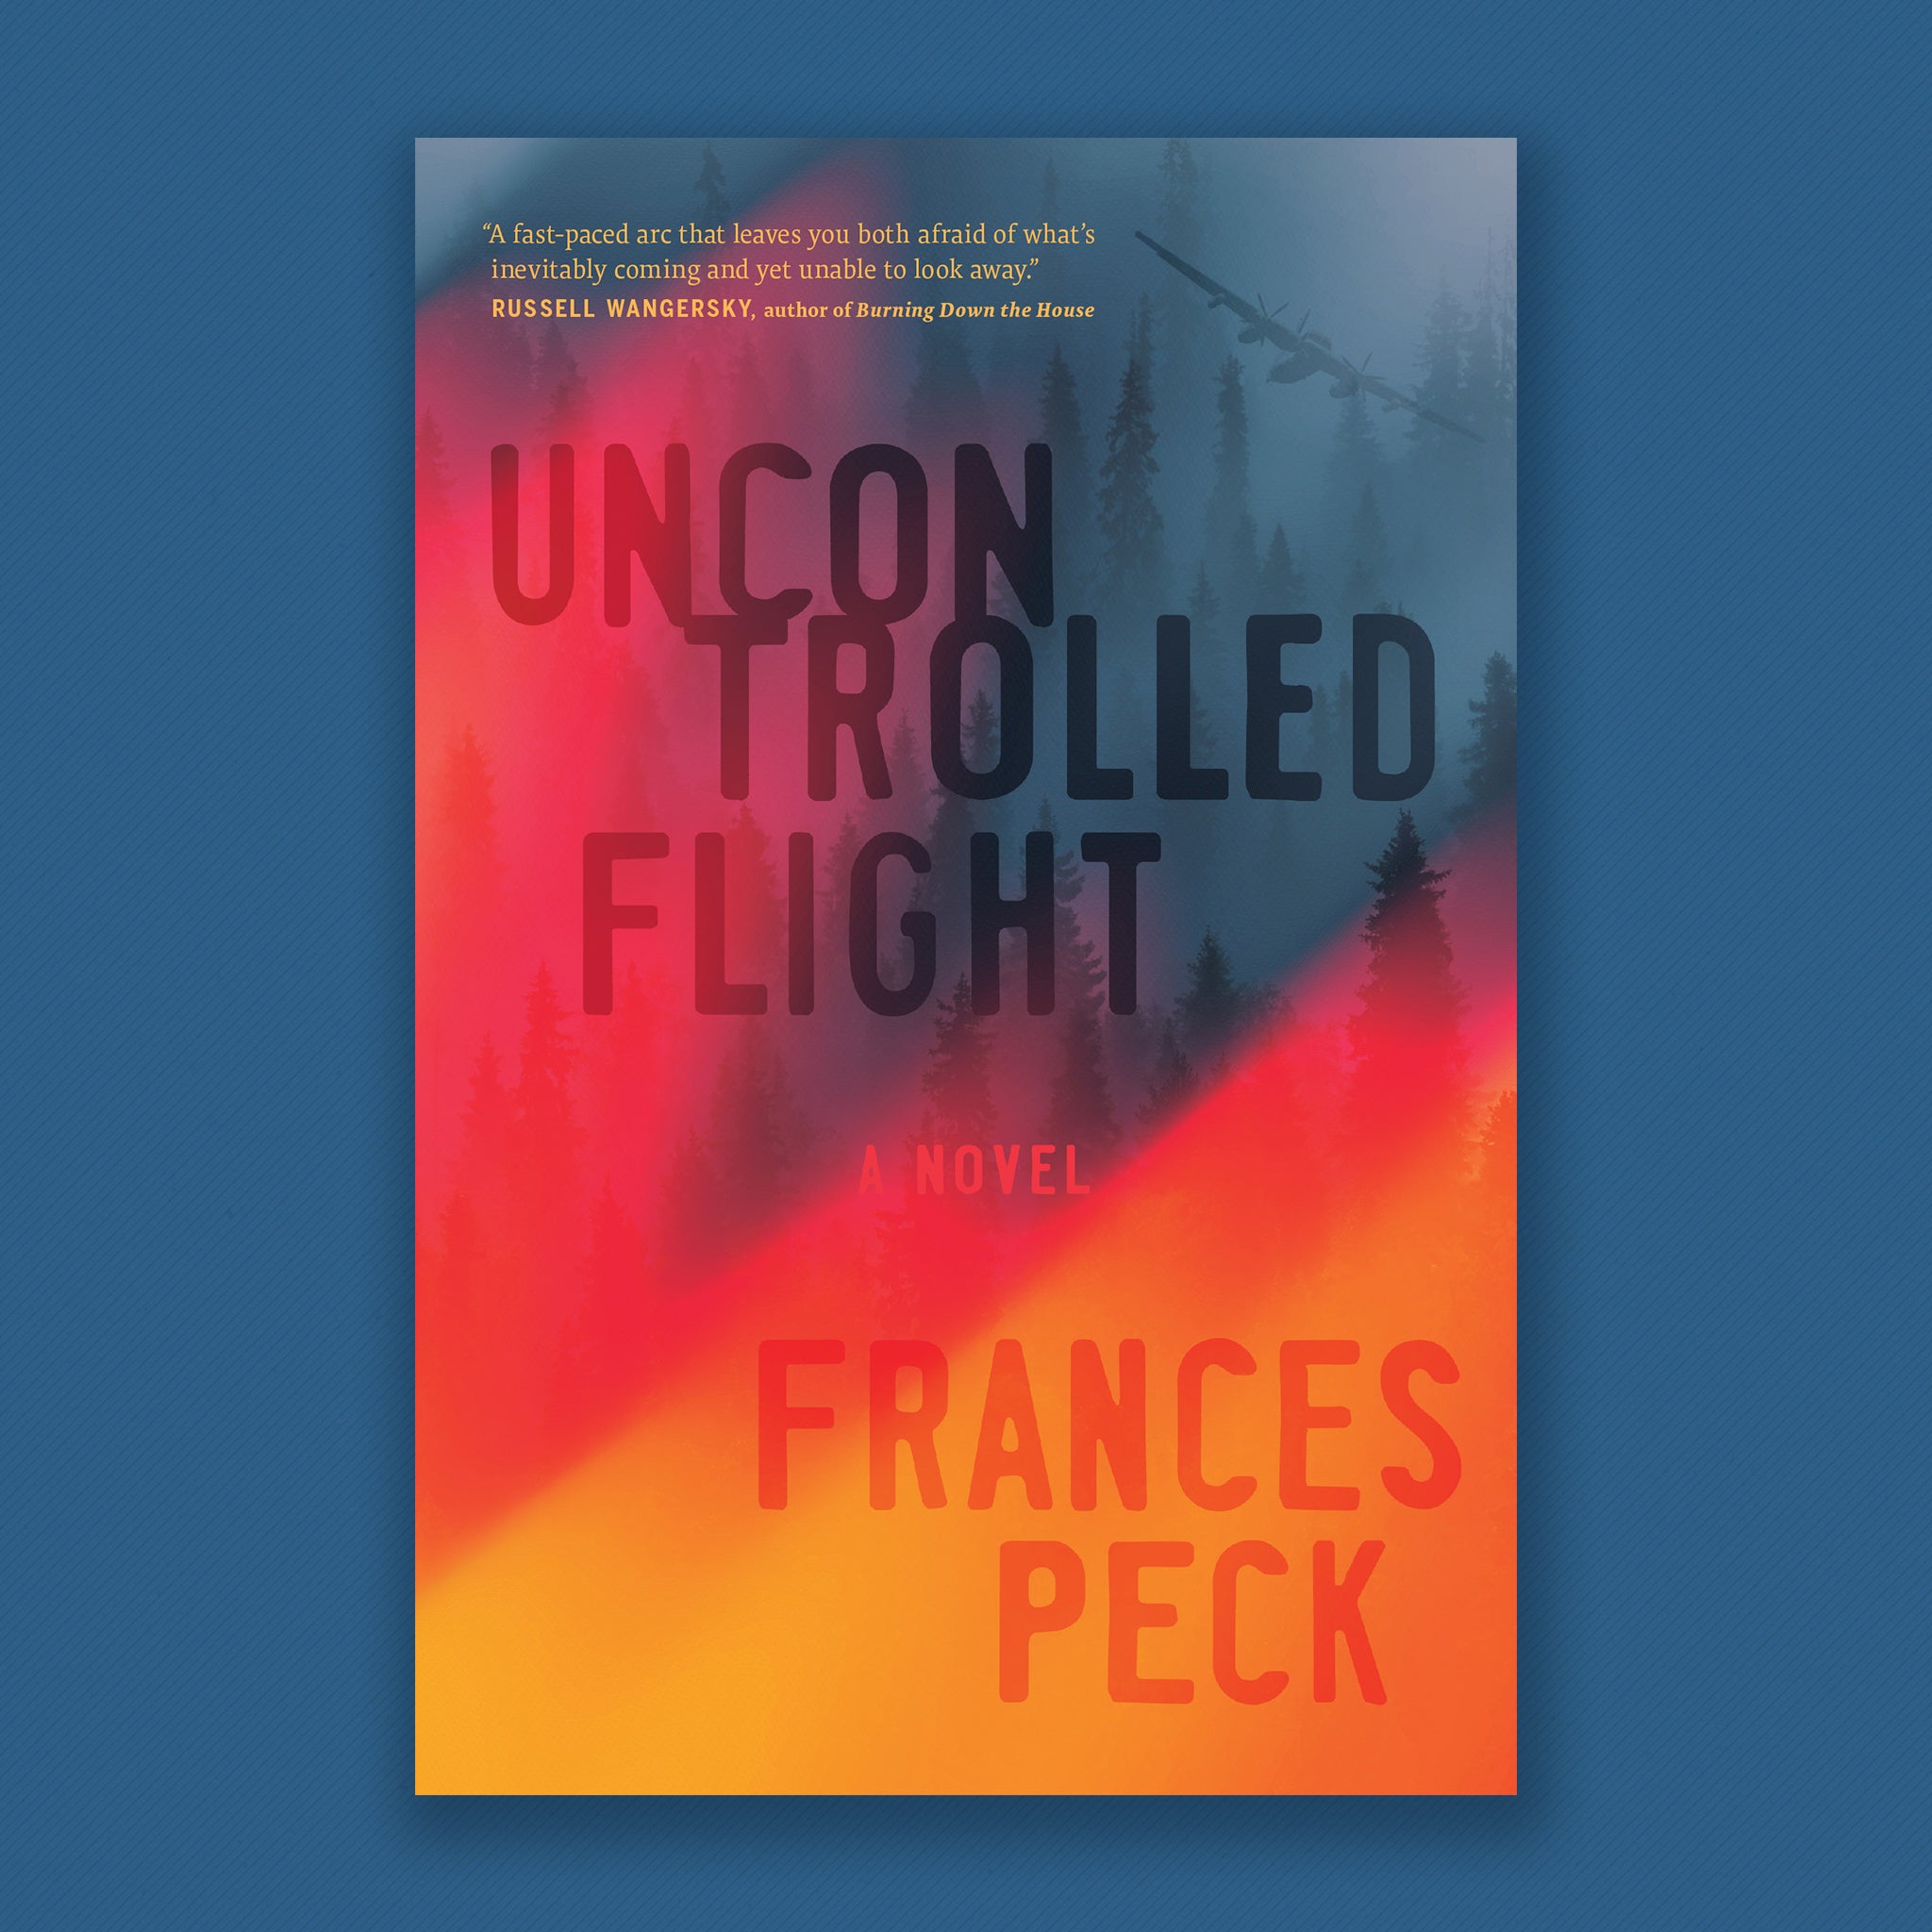 Orange flames rise from the lefthand corner of the page to reach up towards a muted blue forest and the Tracker firefighting plane, soaring just above the tree tops. “Uncontrolled Flight a novel Frances Peck” set in large type stands at the forefront of the image. An orange blurb in the top left corner reads: “A fast-paced arc that leaves you both afraid of what’s inevitably coming and yet unable to look away.” Russell Wangersky, author of Burning Down the House.